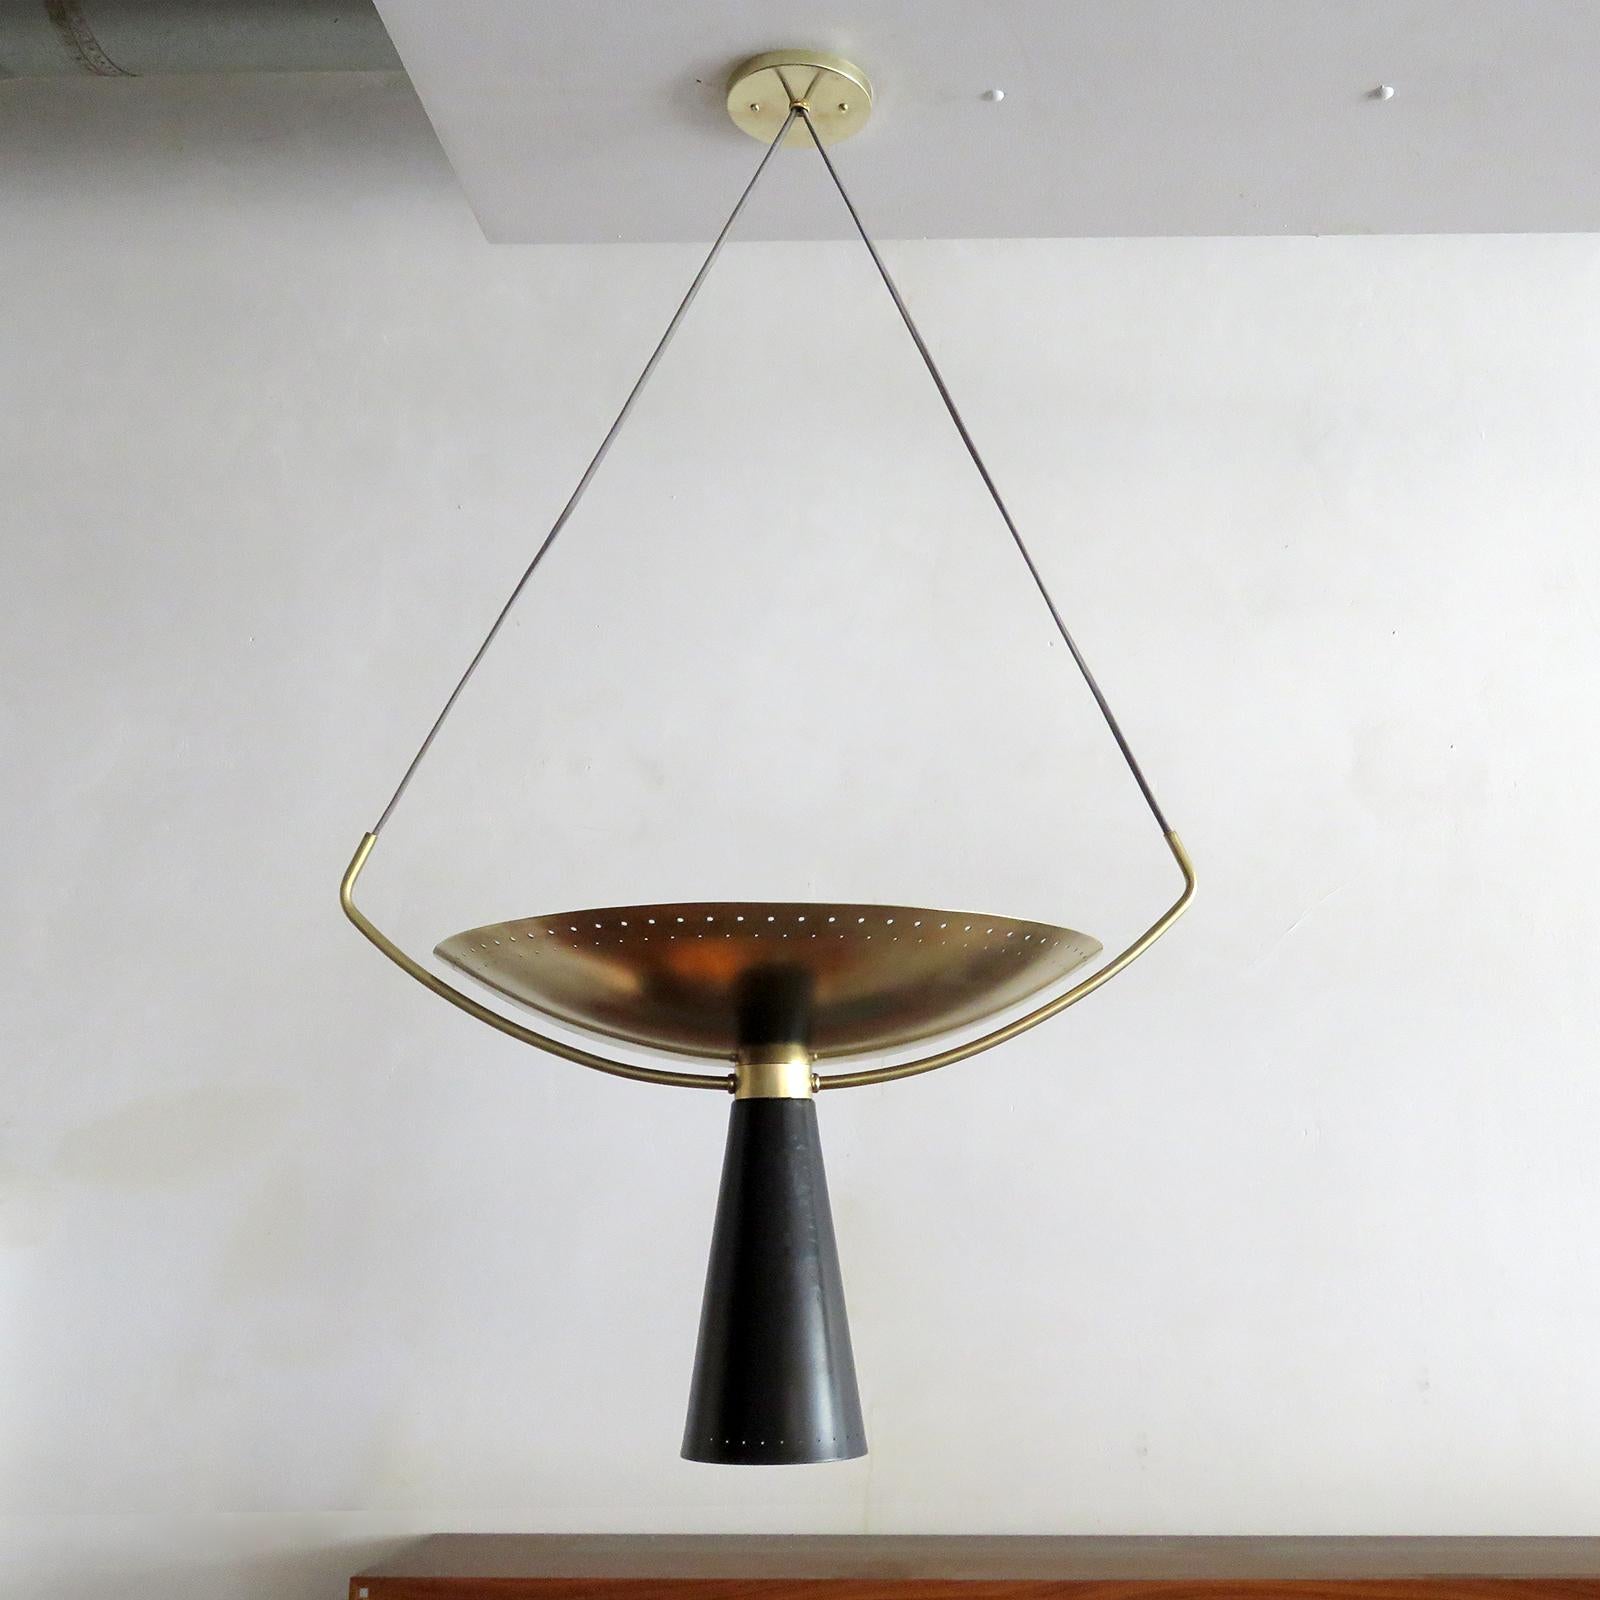 Wonderful two tone pendant light 'Calice' designed by Gallery L7, handcrafted and finished in Los Angeles from American brass, suspended with a perforated, aged brass up-light disc and a black enameled down-light cone. Four E26 sockets per fixture,